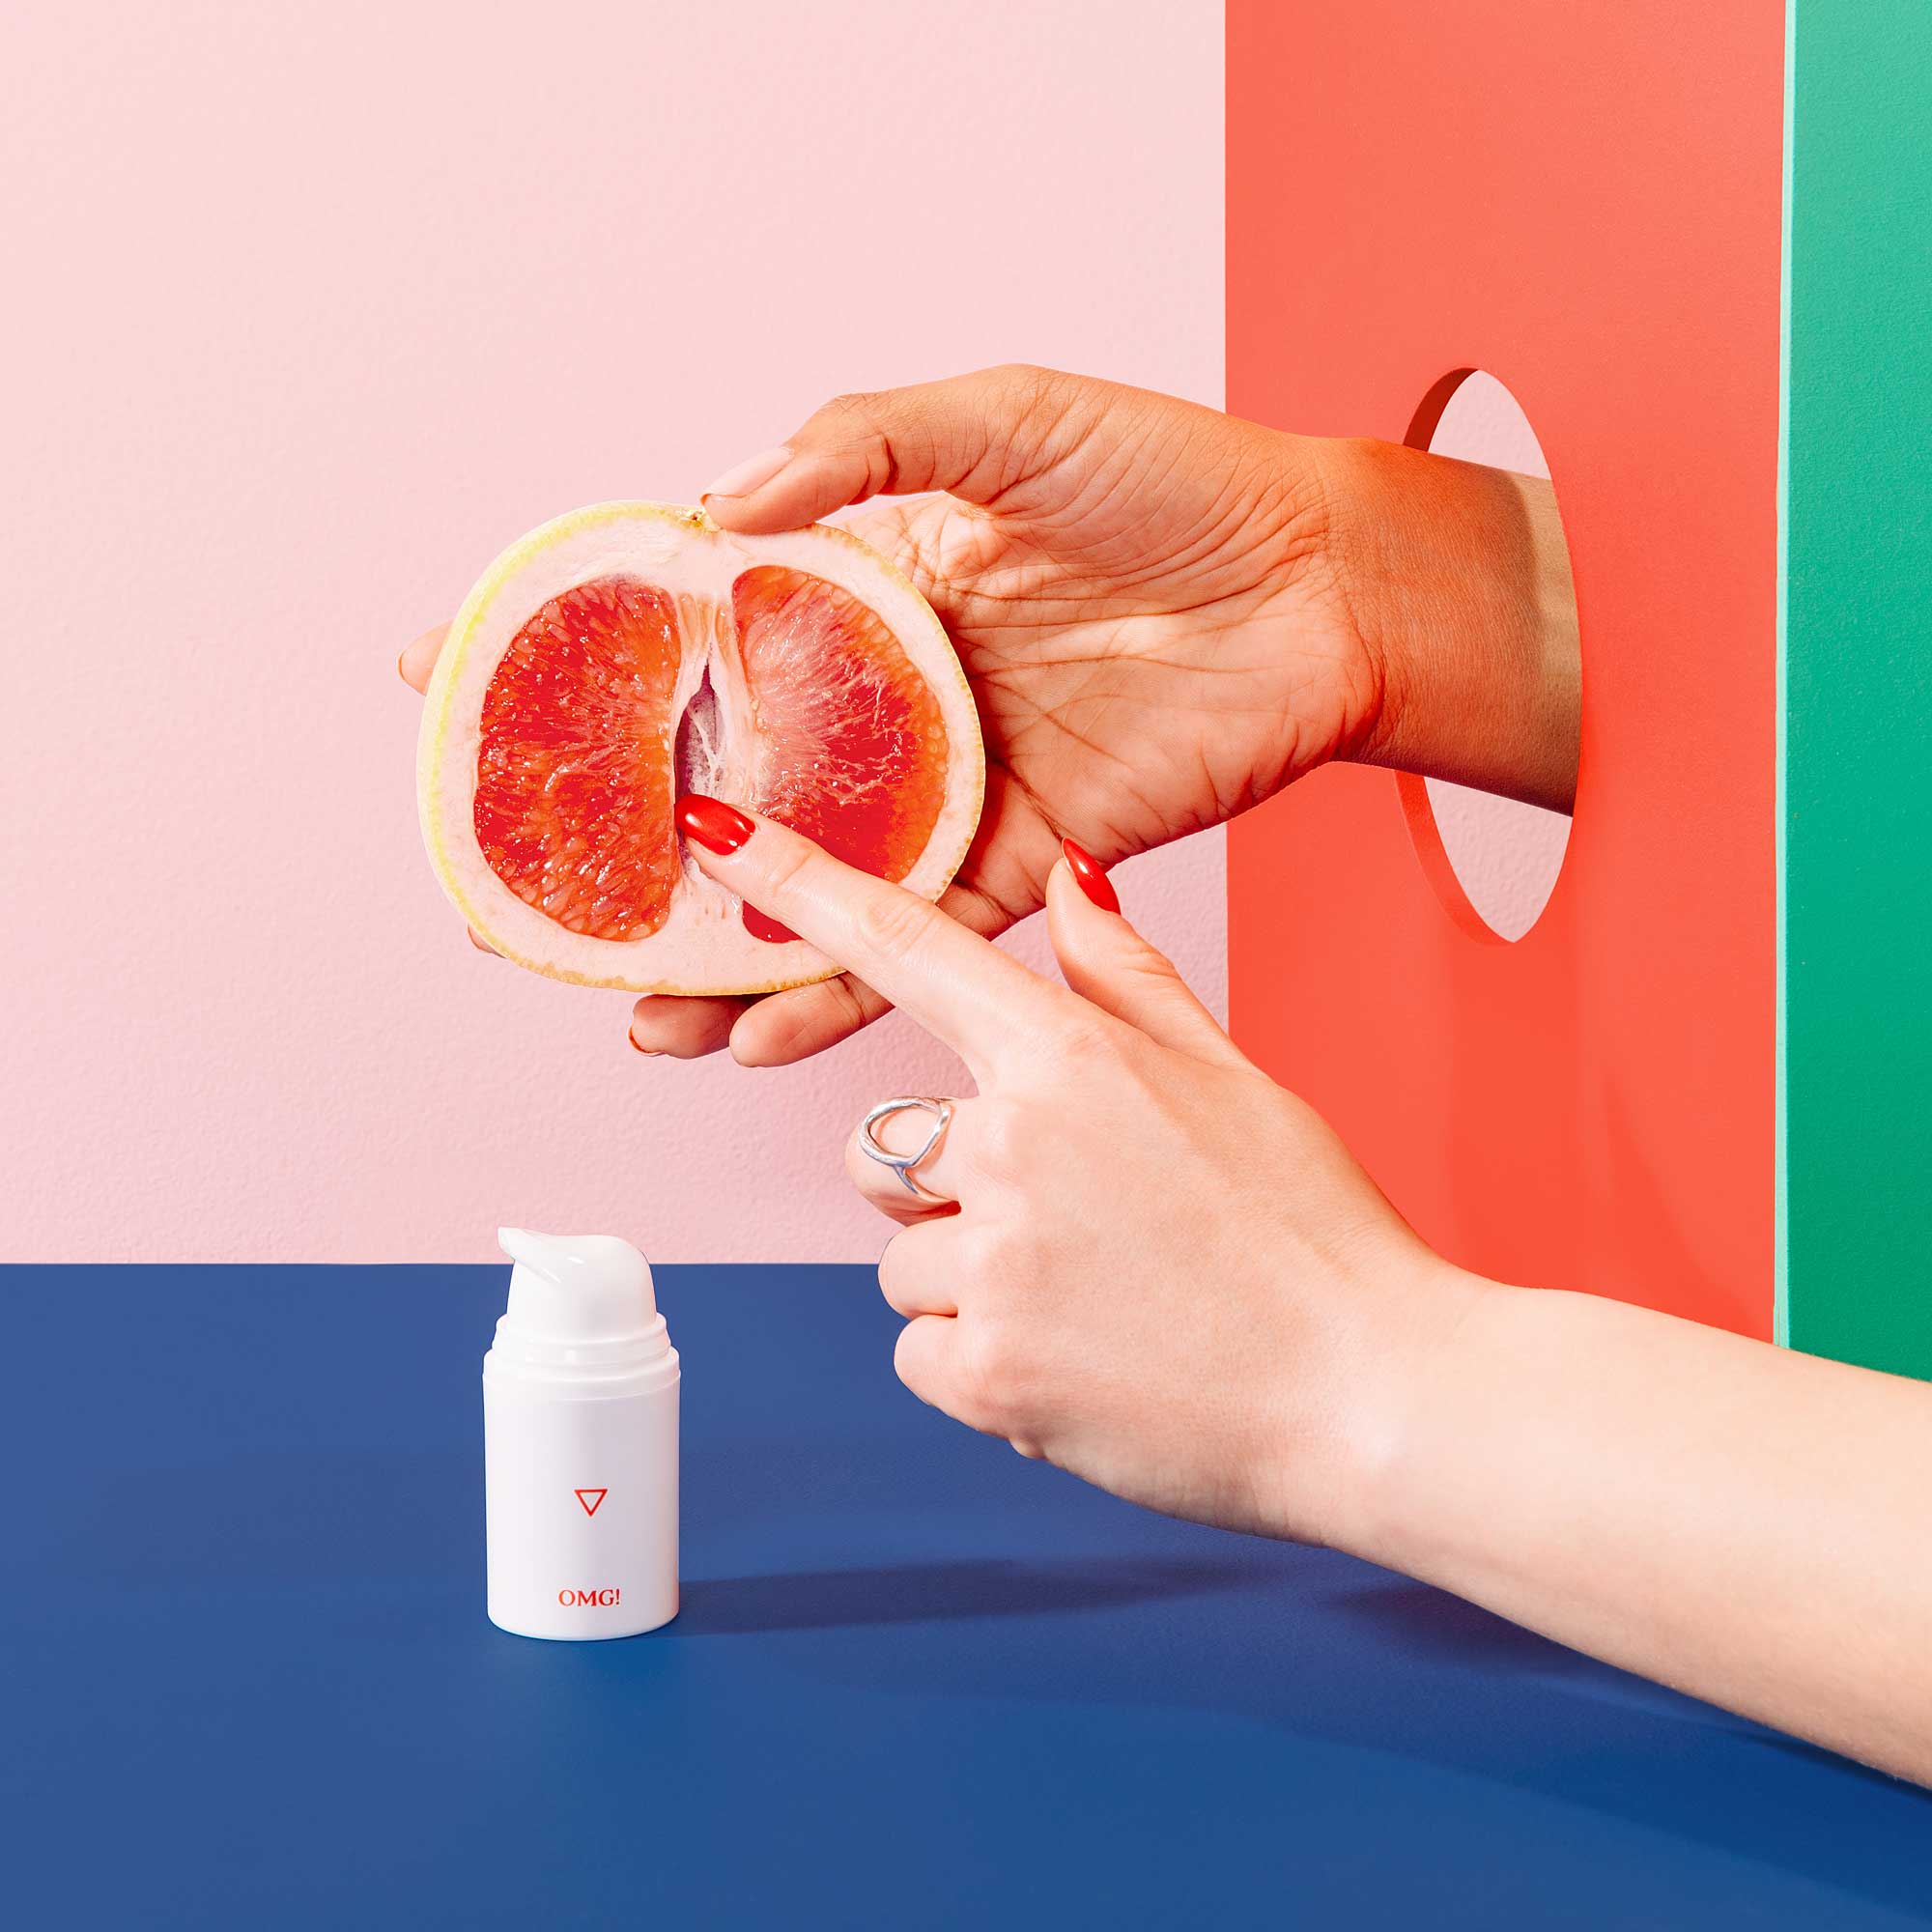 Hand holds a grapefruit while another hand touches it with one finger next to bottle of Wisp OMG! Cream on a blue surface, on a pink background